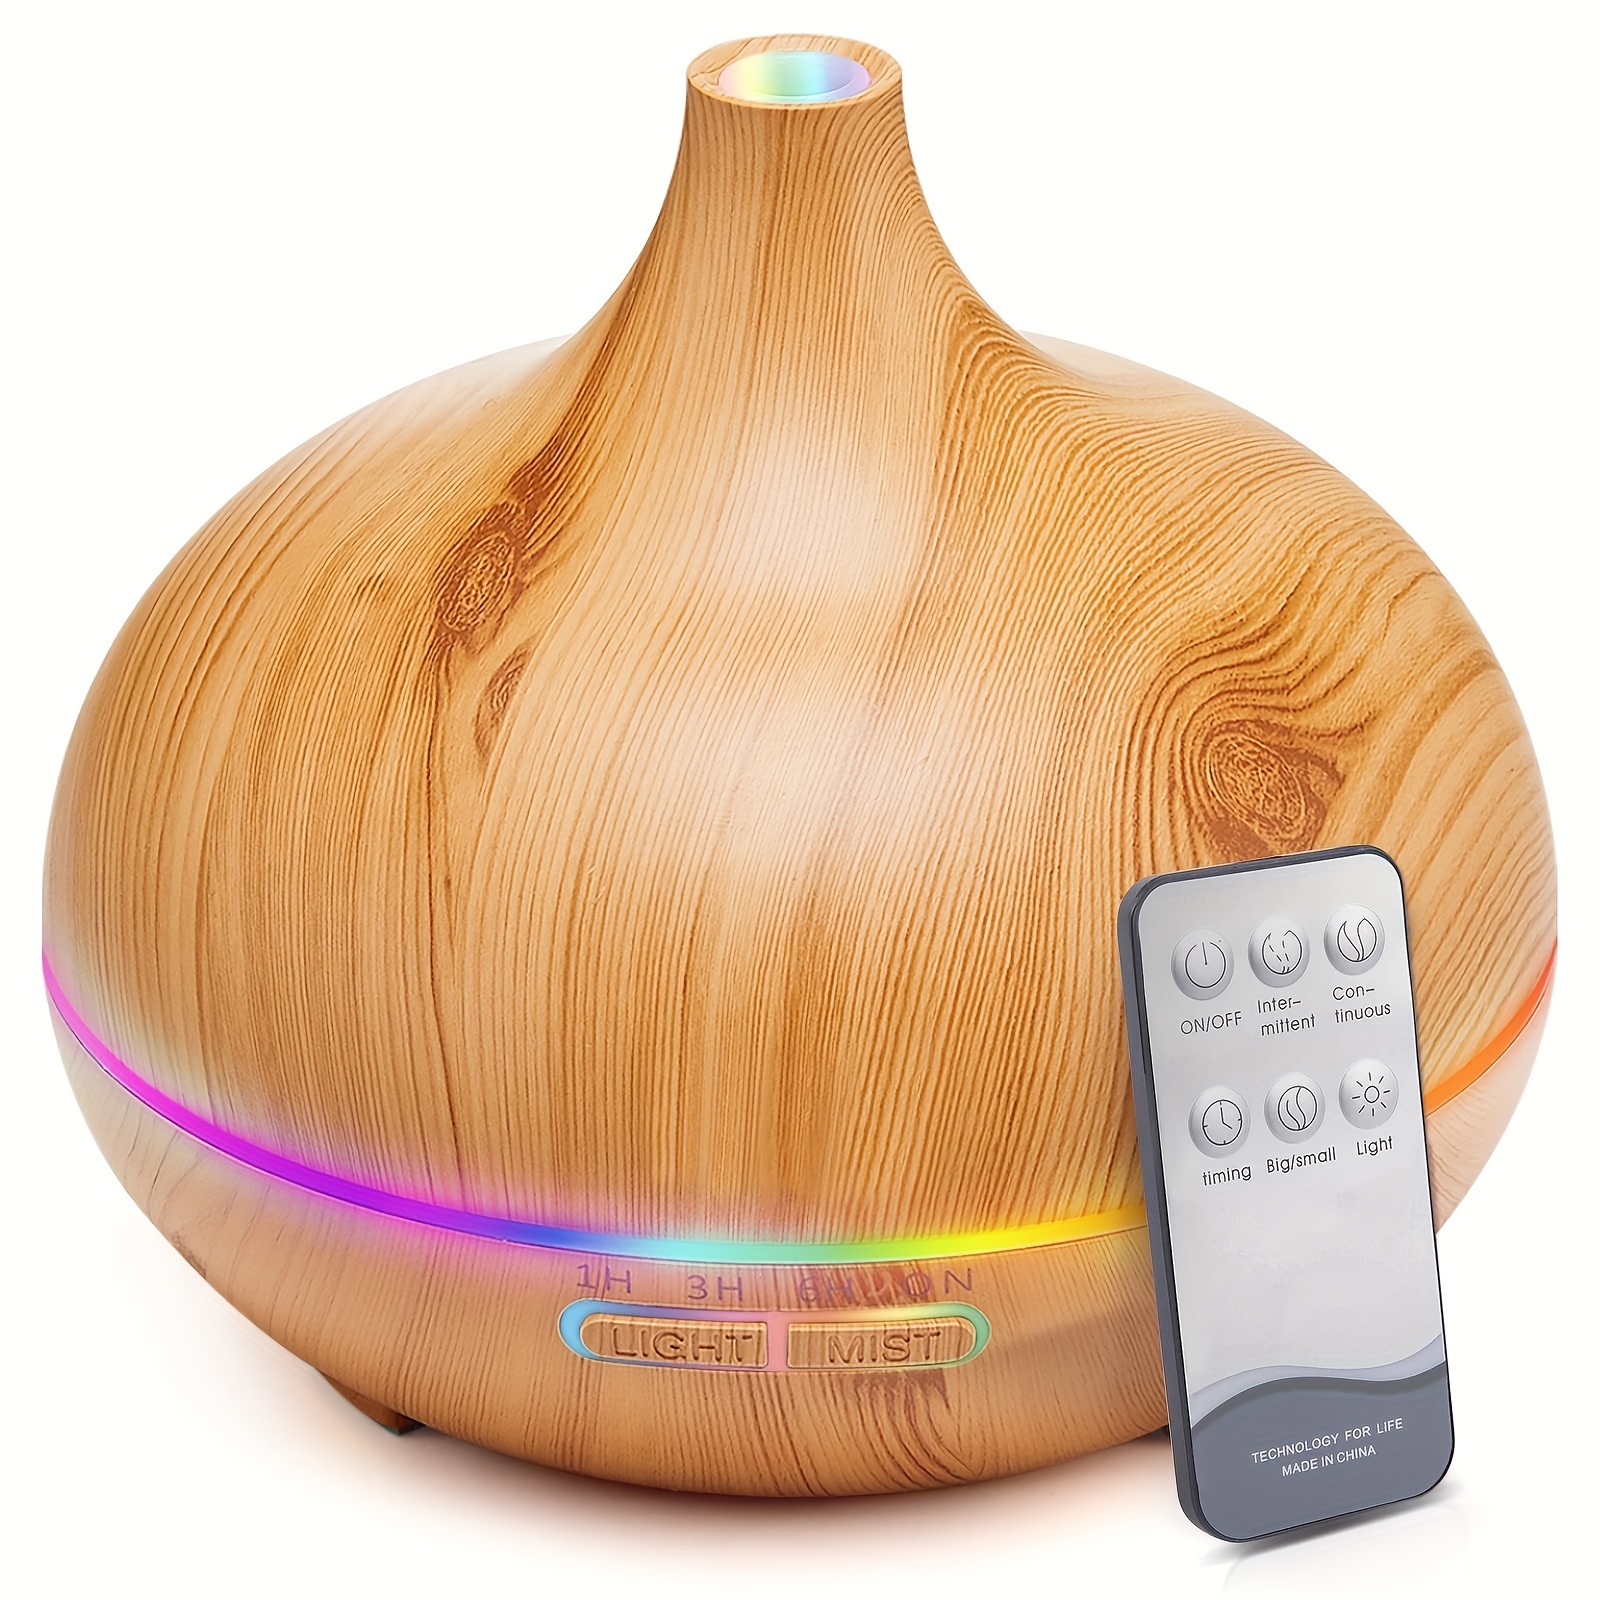  300ml Ultrasonic Volcano Flame Humidifier Original Flame  Diffuser Volcano Lamp Aroma Diffuser for Essential Oils Diffusers, Small  Fireplace Humidifier Fire Oil Diffuse for Home Large Room Kids Bedroom :  Health 